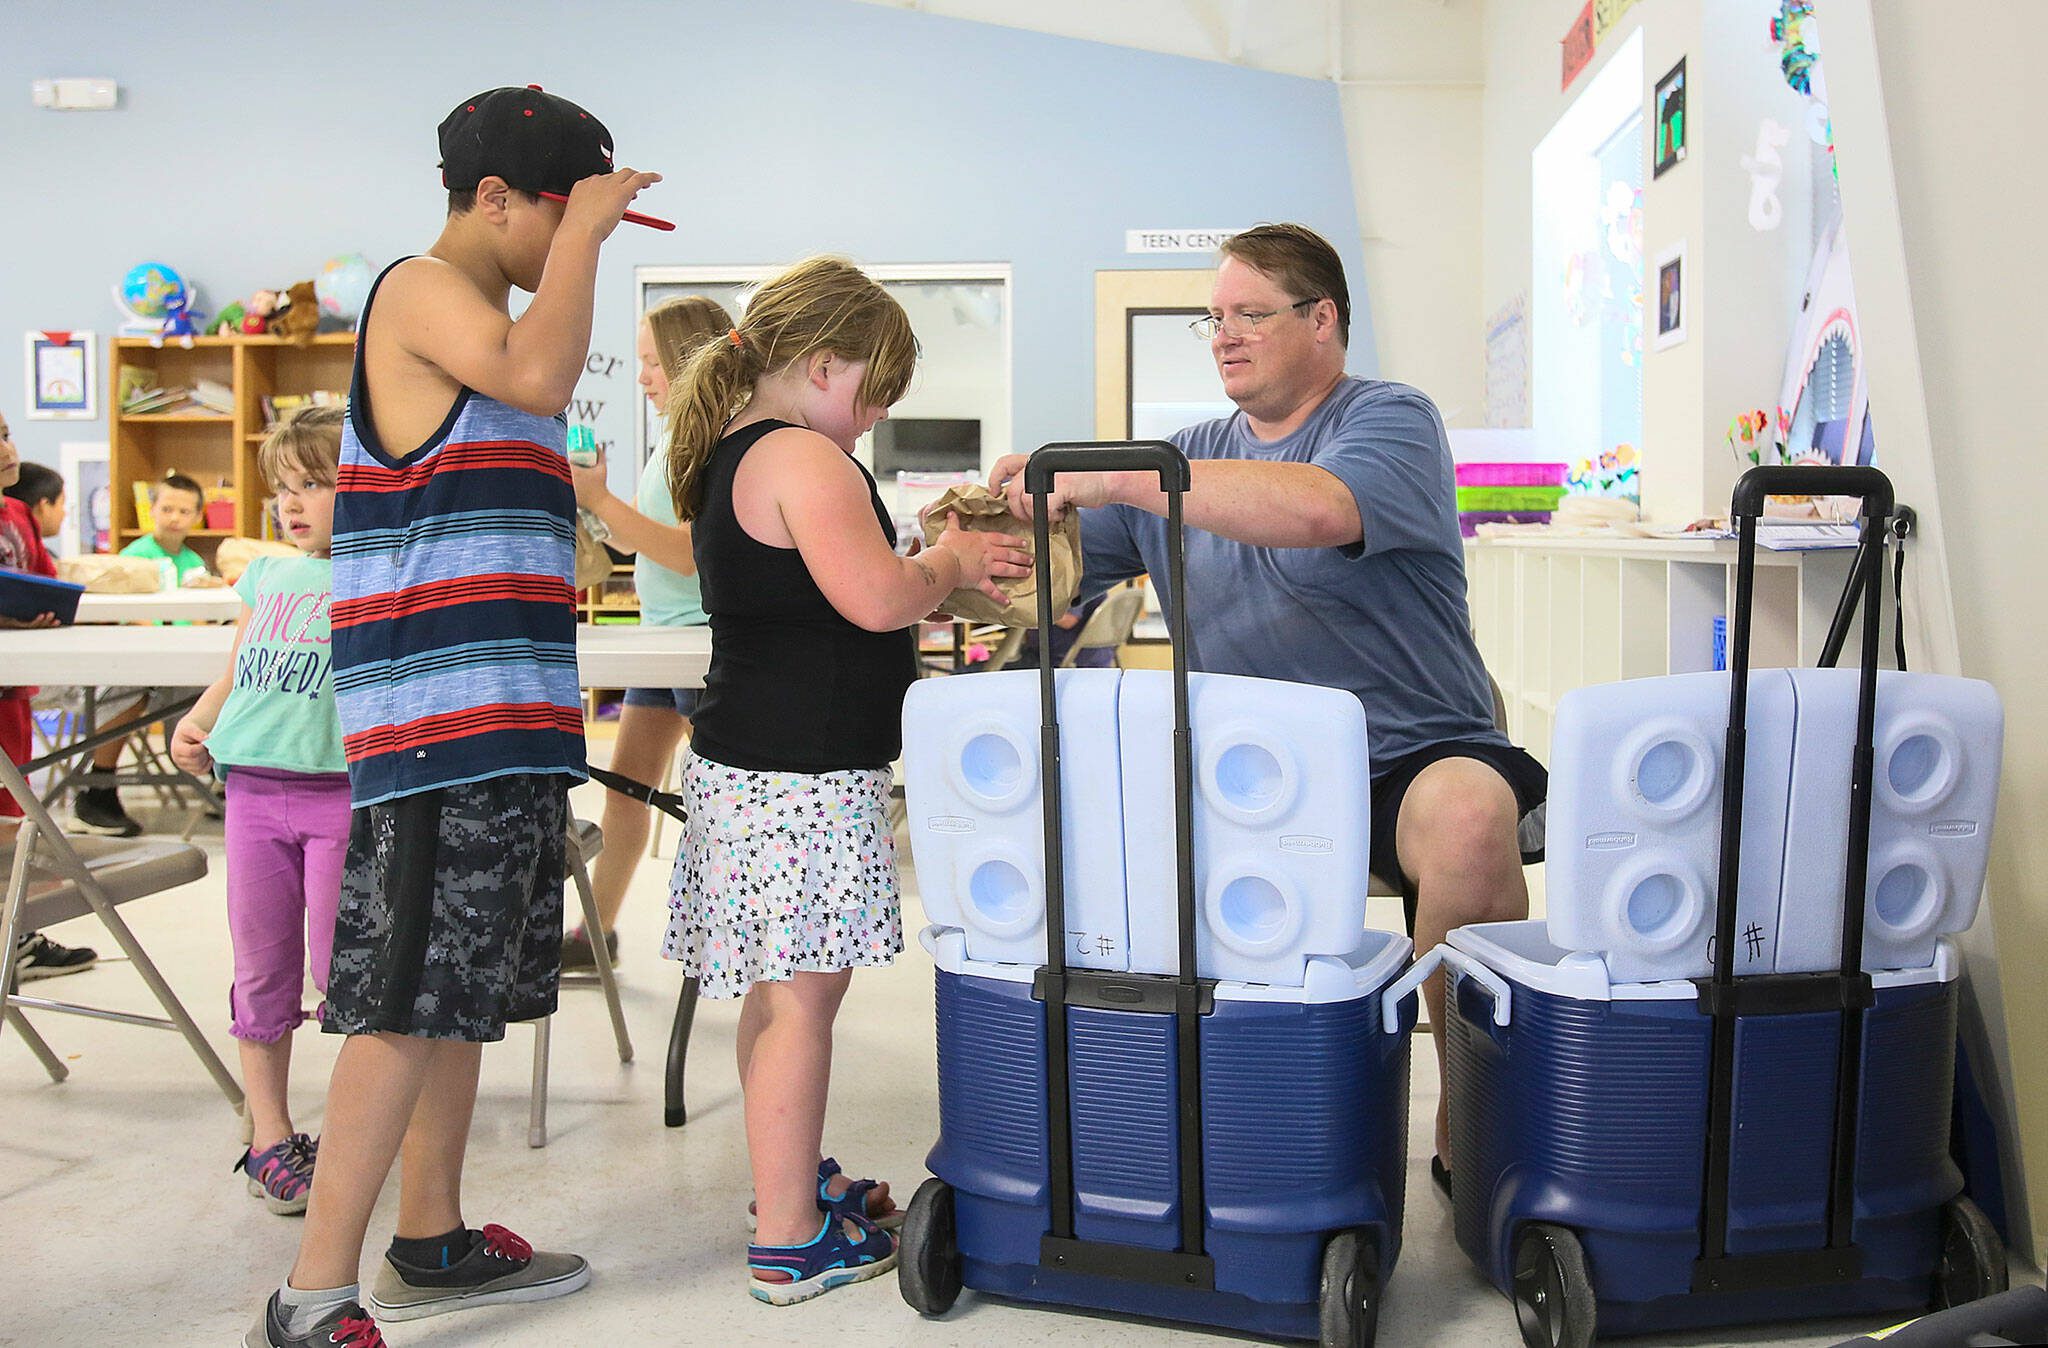 From one of two coolers, Mike Bradshaw-Heiberg hands out brown bag lunches and half pints of milk as part of the Kids Cafe summer meals program on July 1, 2015 in Sultan, Washington. (Kevin Clark / The Herald)